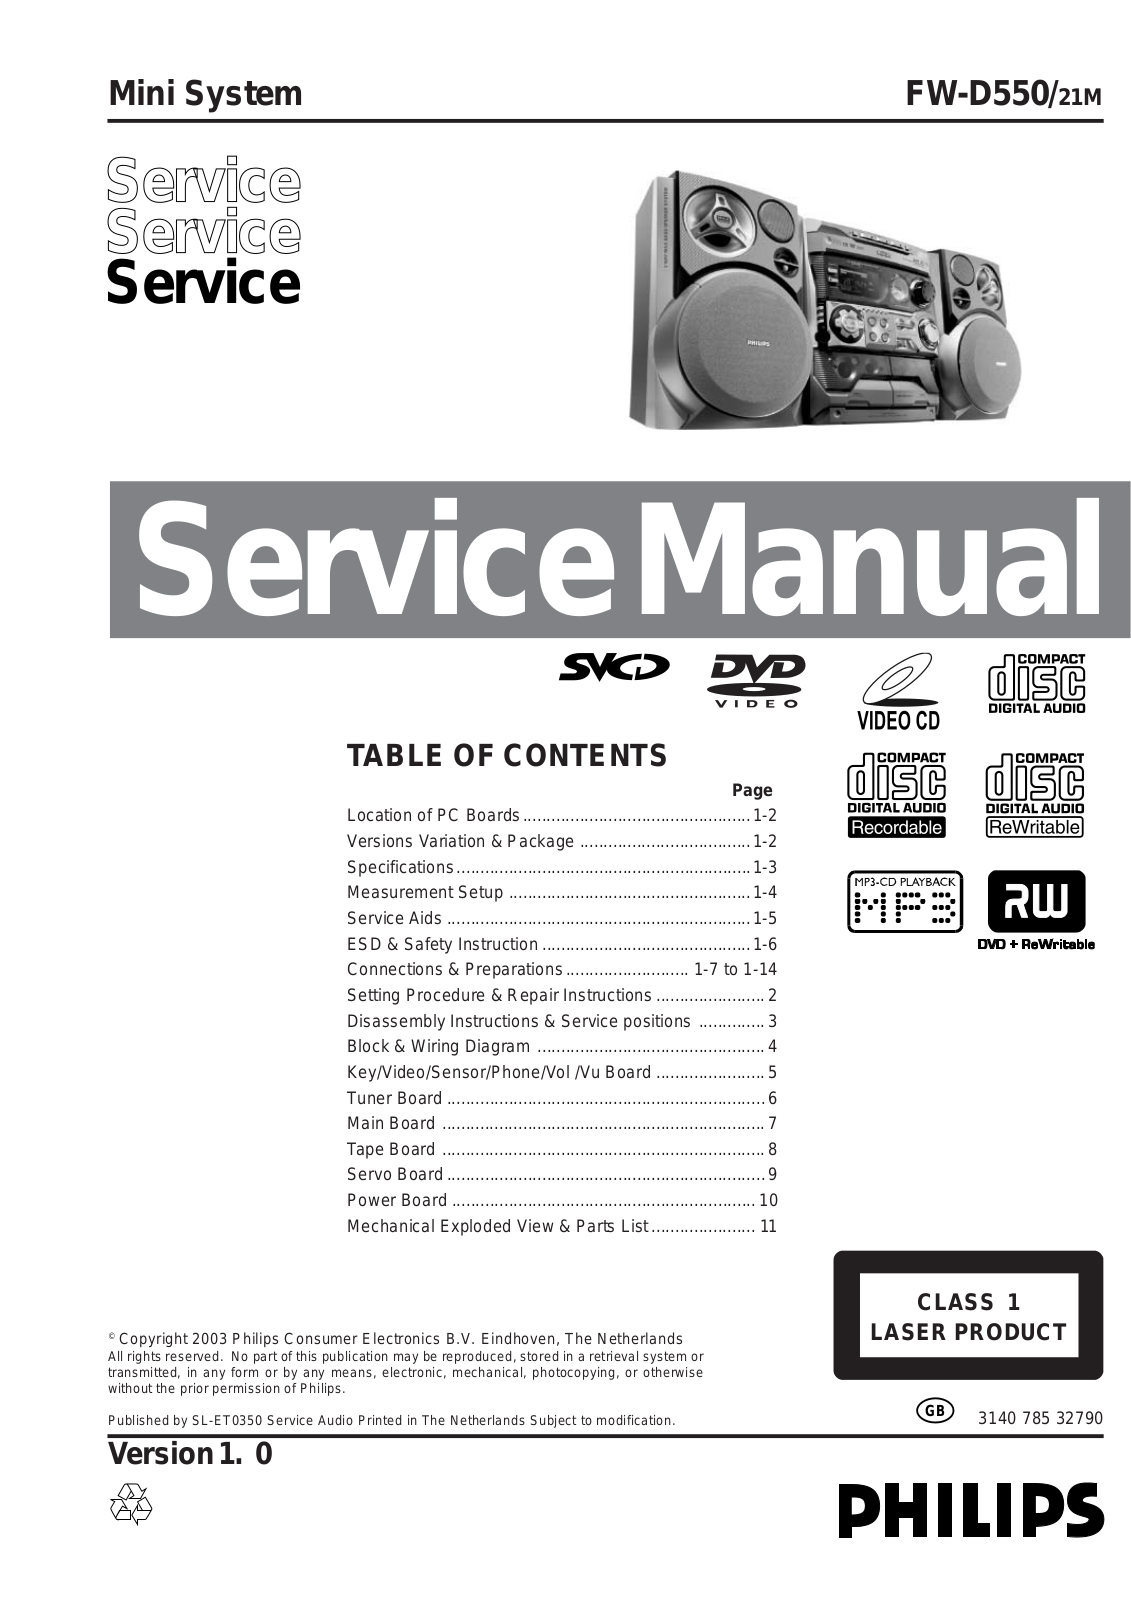 Philips FWD-550 Service manual